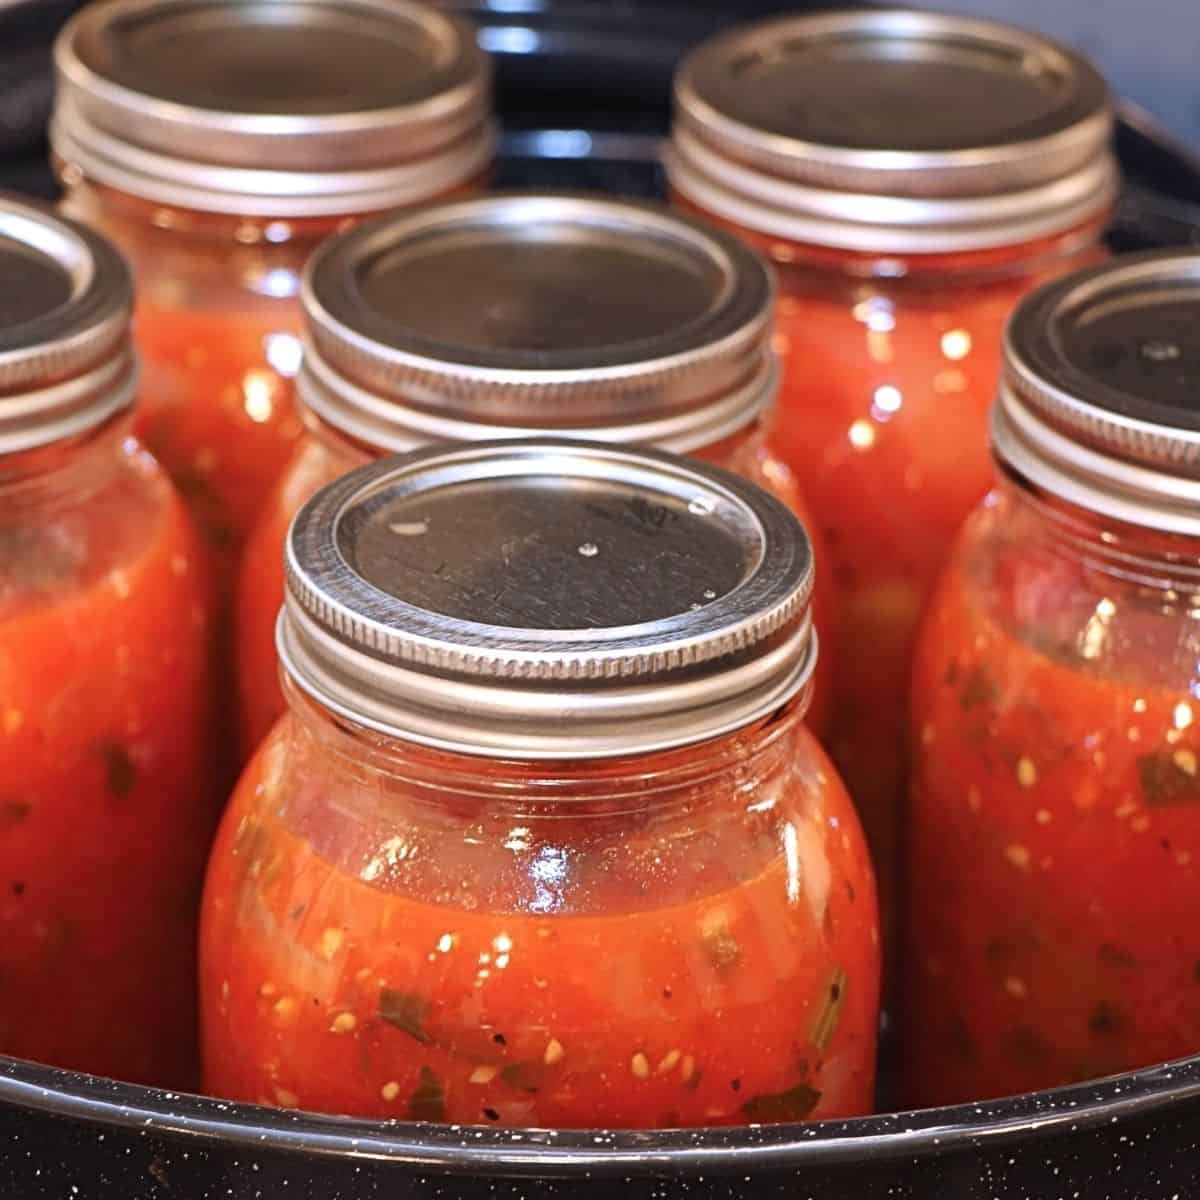 How to Preserve Tomatoes to Enjoy Year Round, a simple guide featuring popular methods such as canning, freezing, and drying.